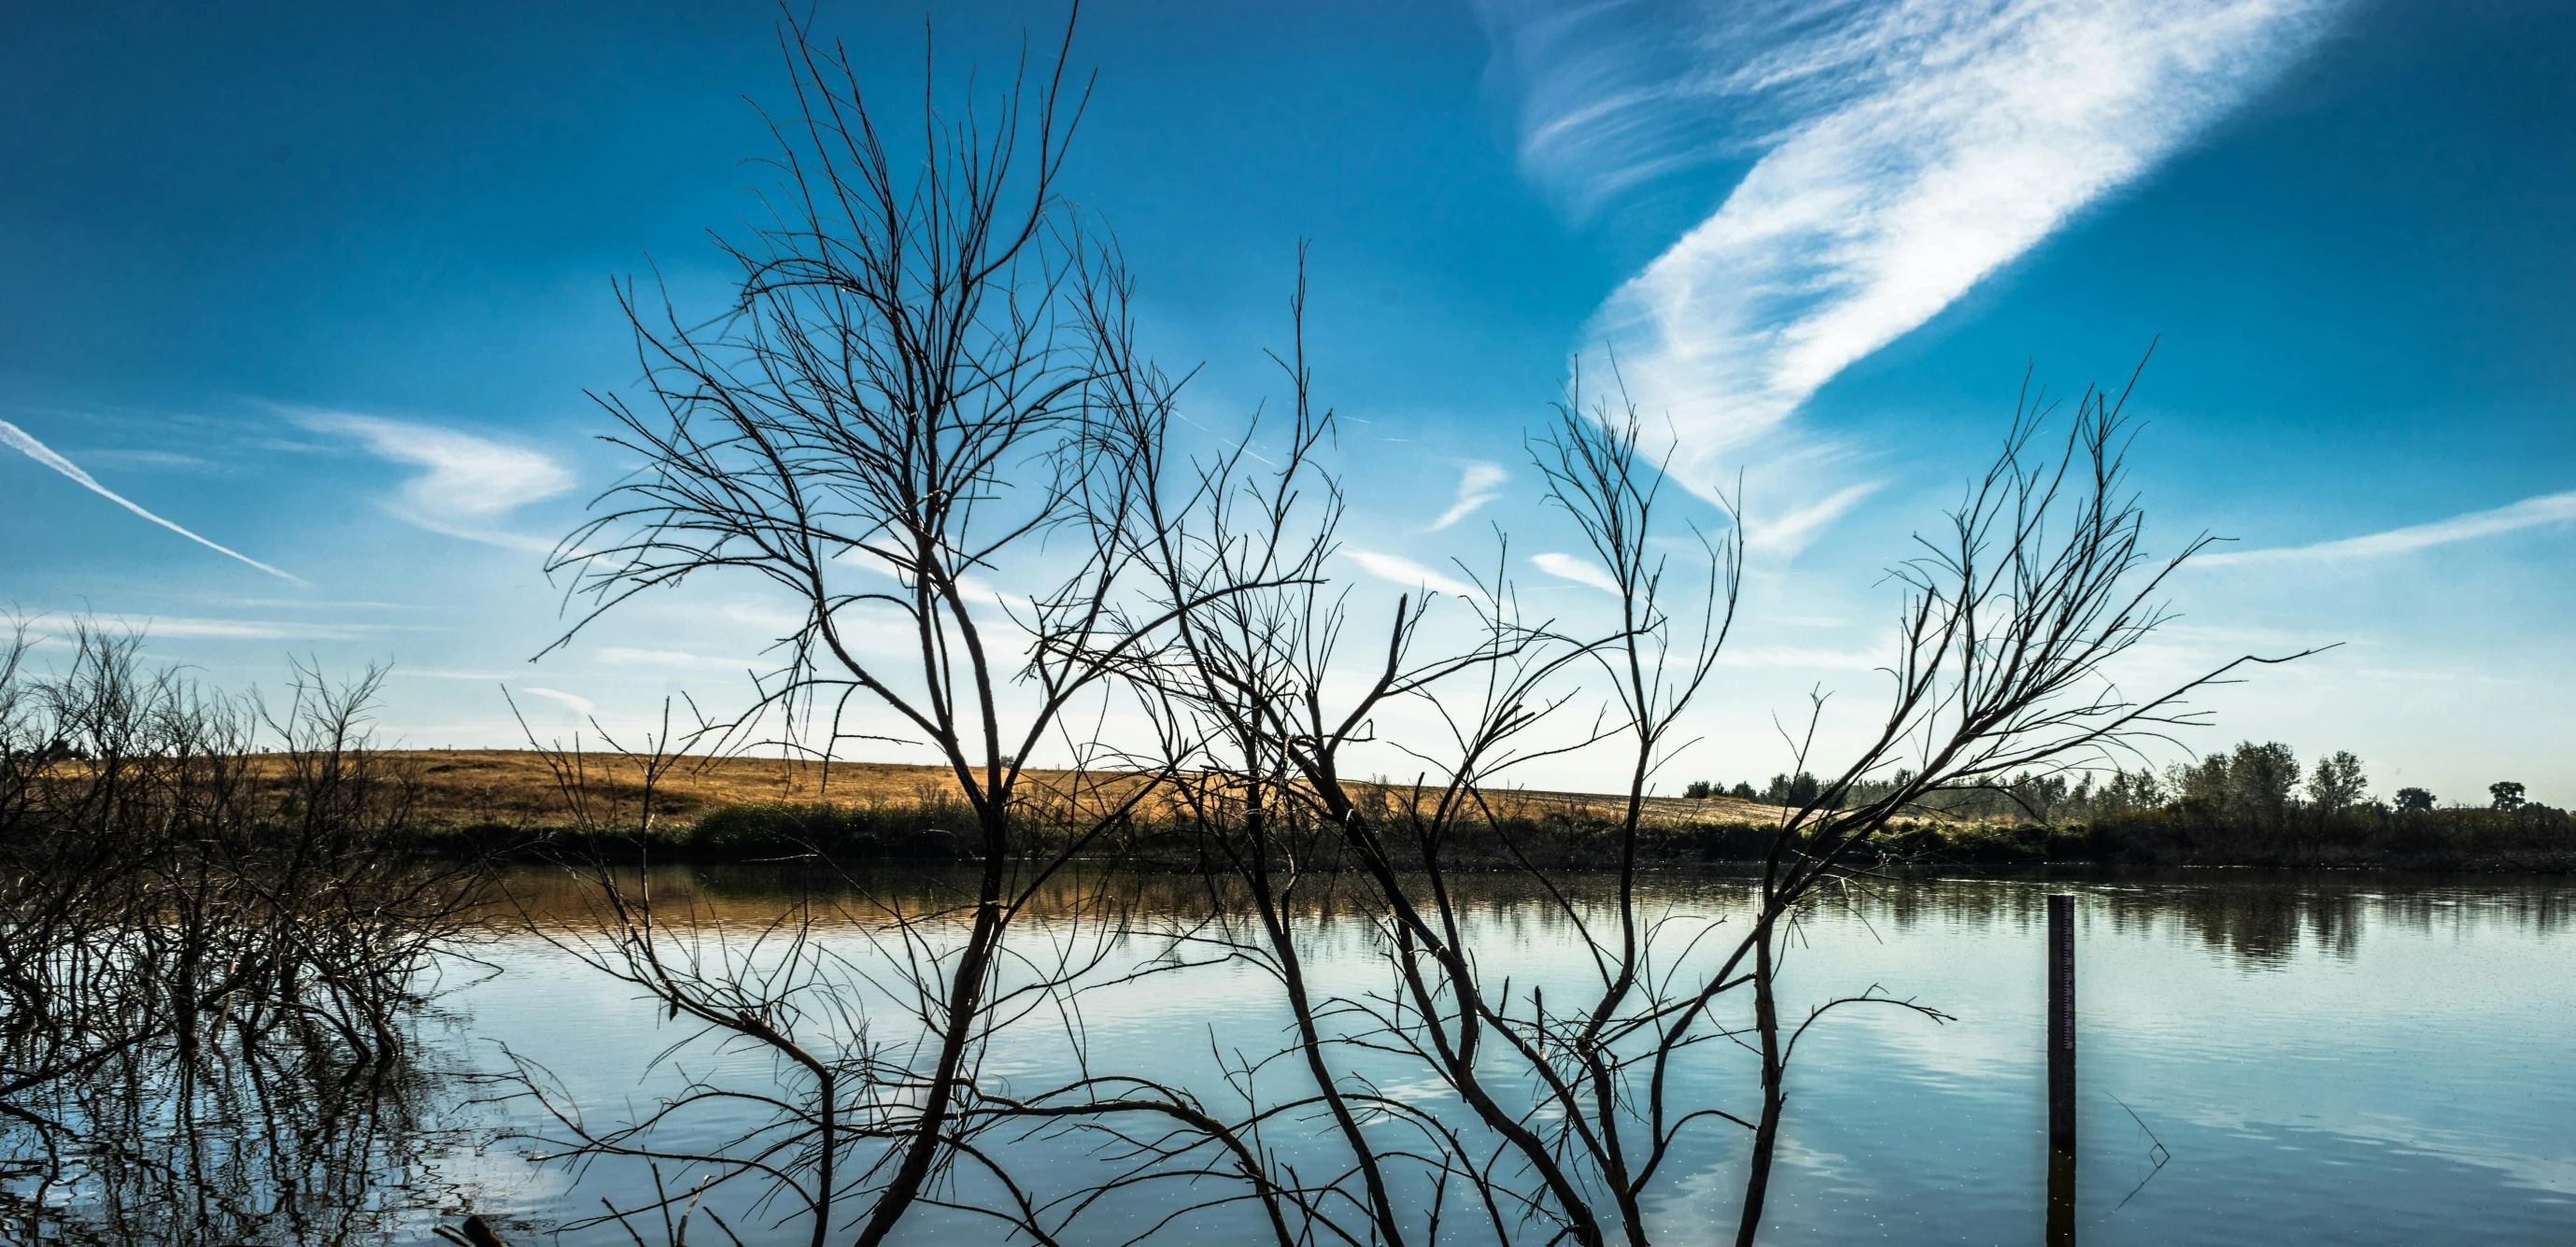 a body of water with trees in the foreground, by Peter Churcher, unsplash, land art, with branches reaching the sky, “ iron bark, istock, reed on riverbank